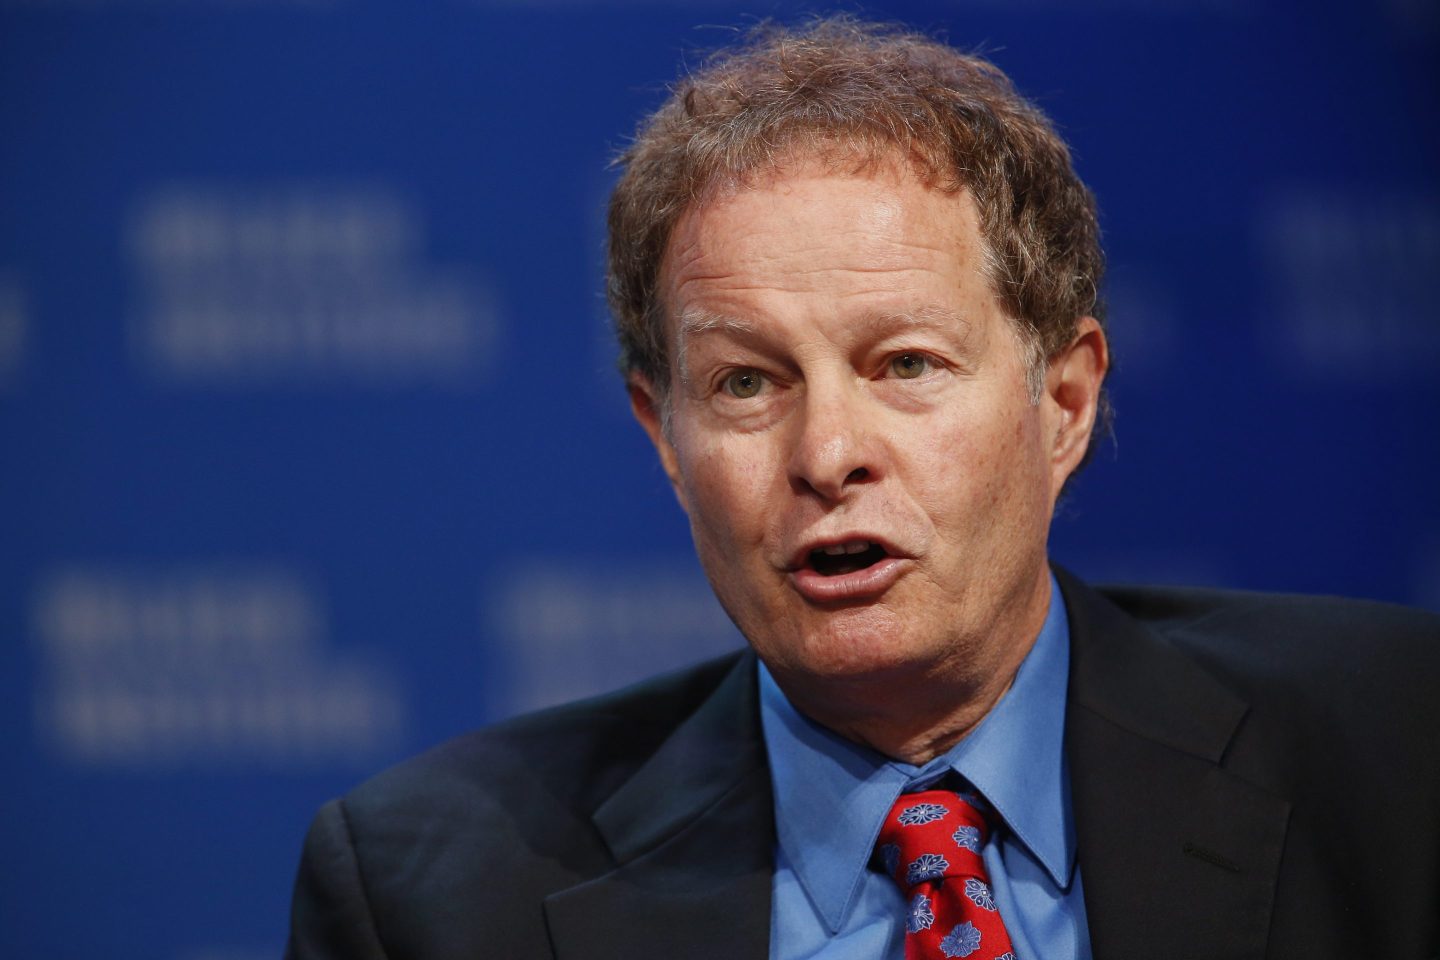 John Mackey, co-founder and ex-CEO of Whole Foods, is publishing a new book called 'The Whole Story.'